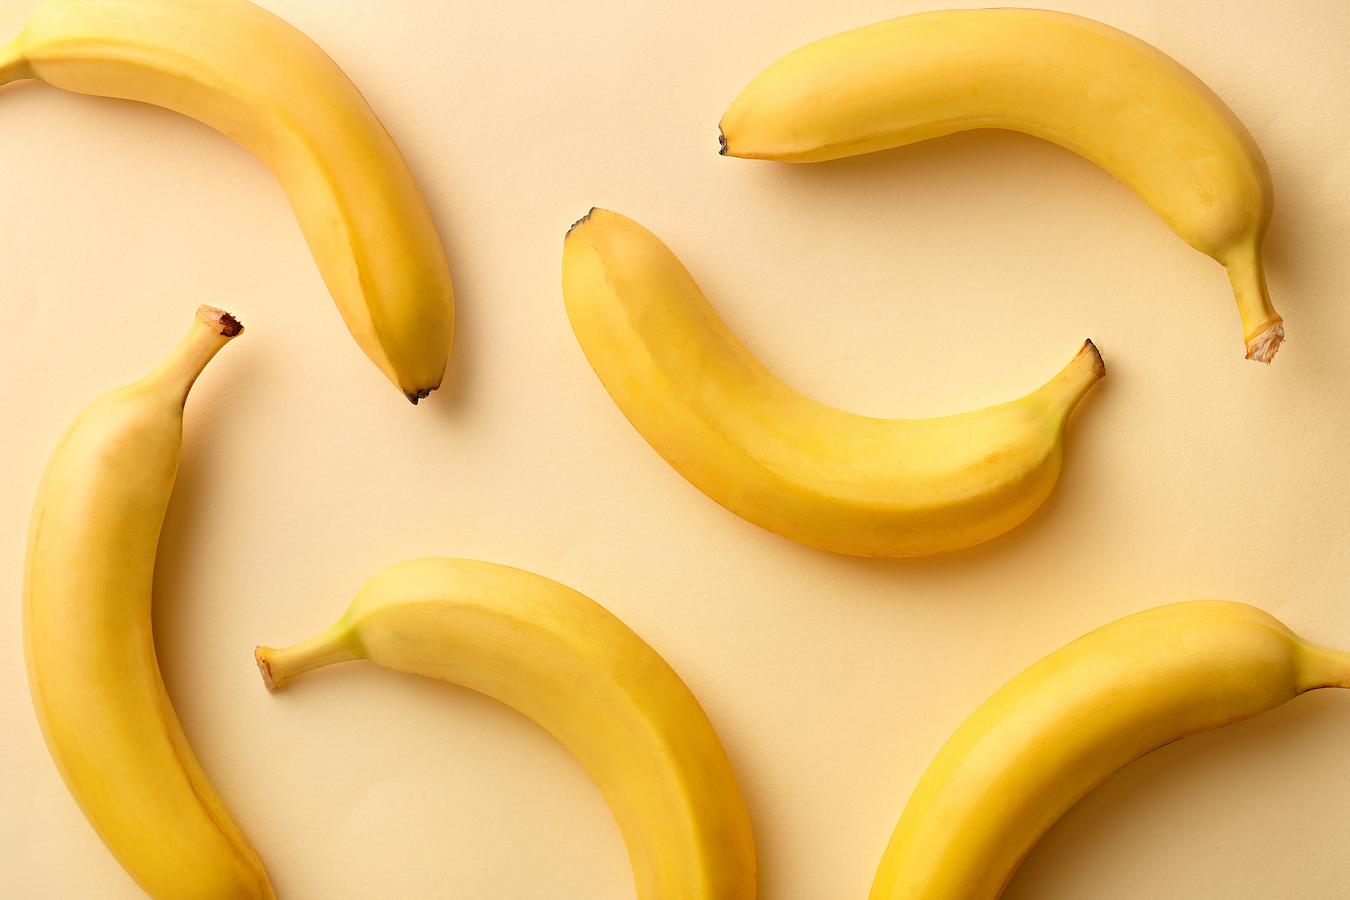 a group of bananas food intolerance upset stomach human health intestinal microbiome bowel movements processed foods